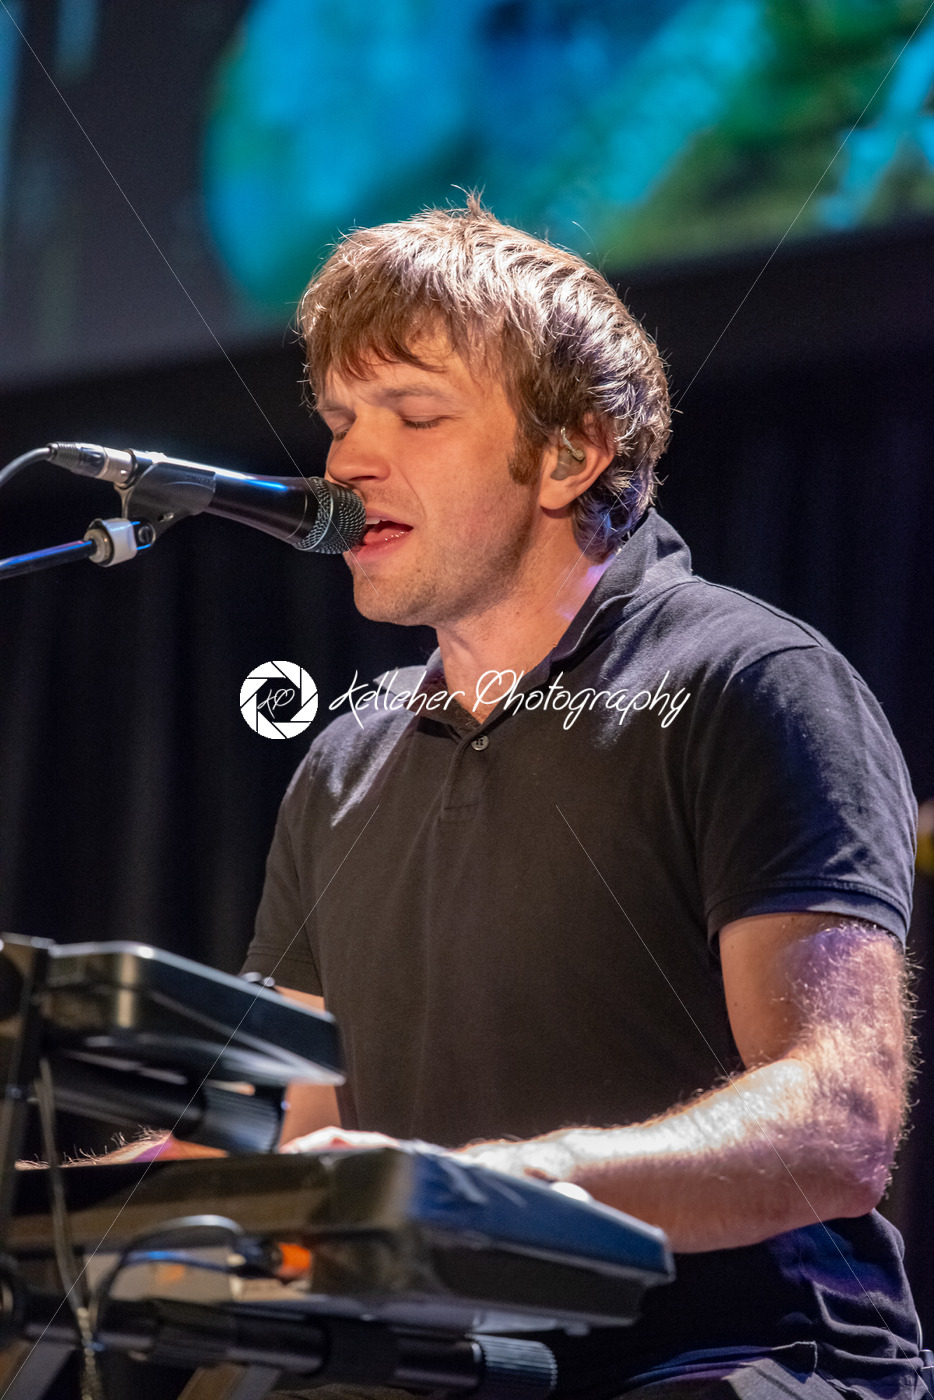 ITHACA, NY – NOVEMBER 4, 2018: Vocalist Andy Ross of the band OK Go performs on their Live Videos tour at the State Theatre of Ithaca - Kelleher Photography Store